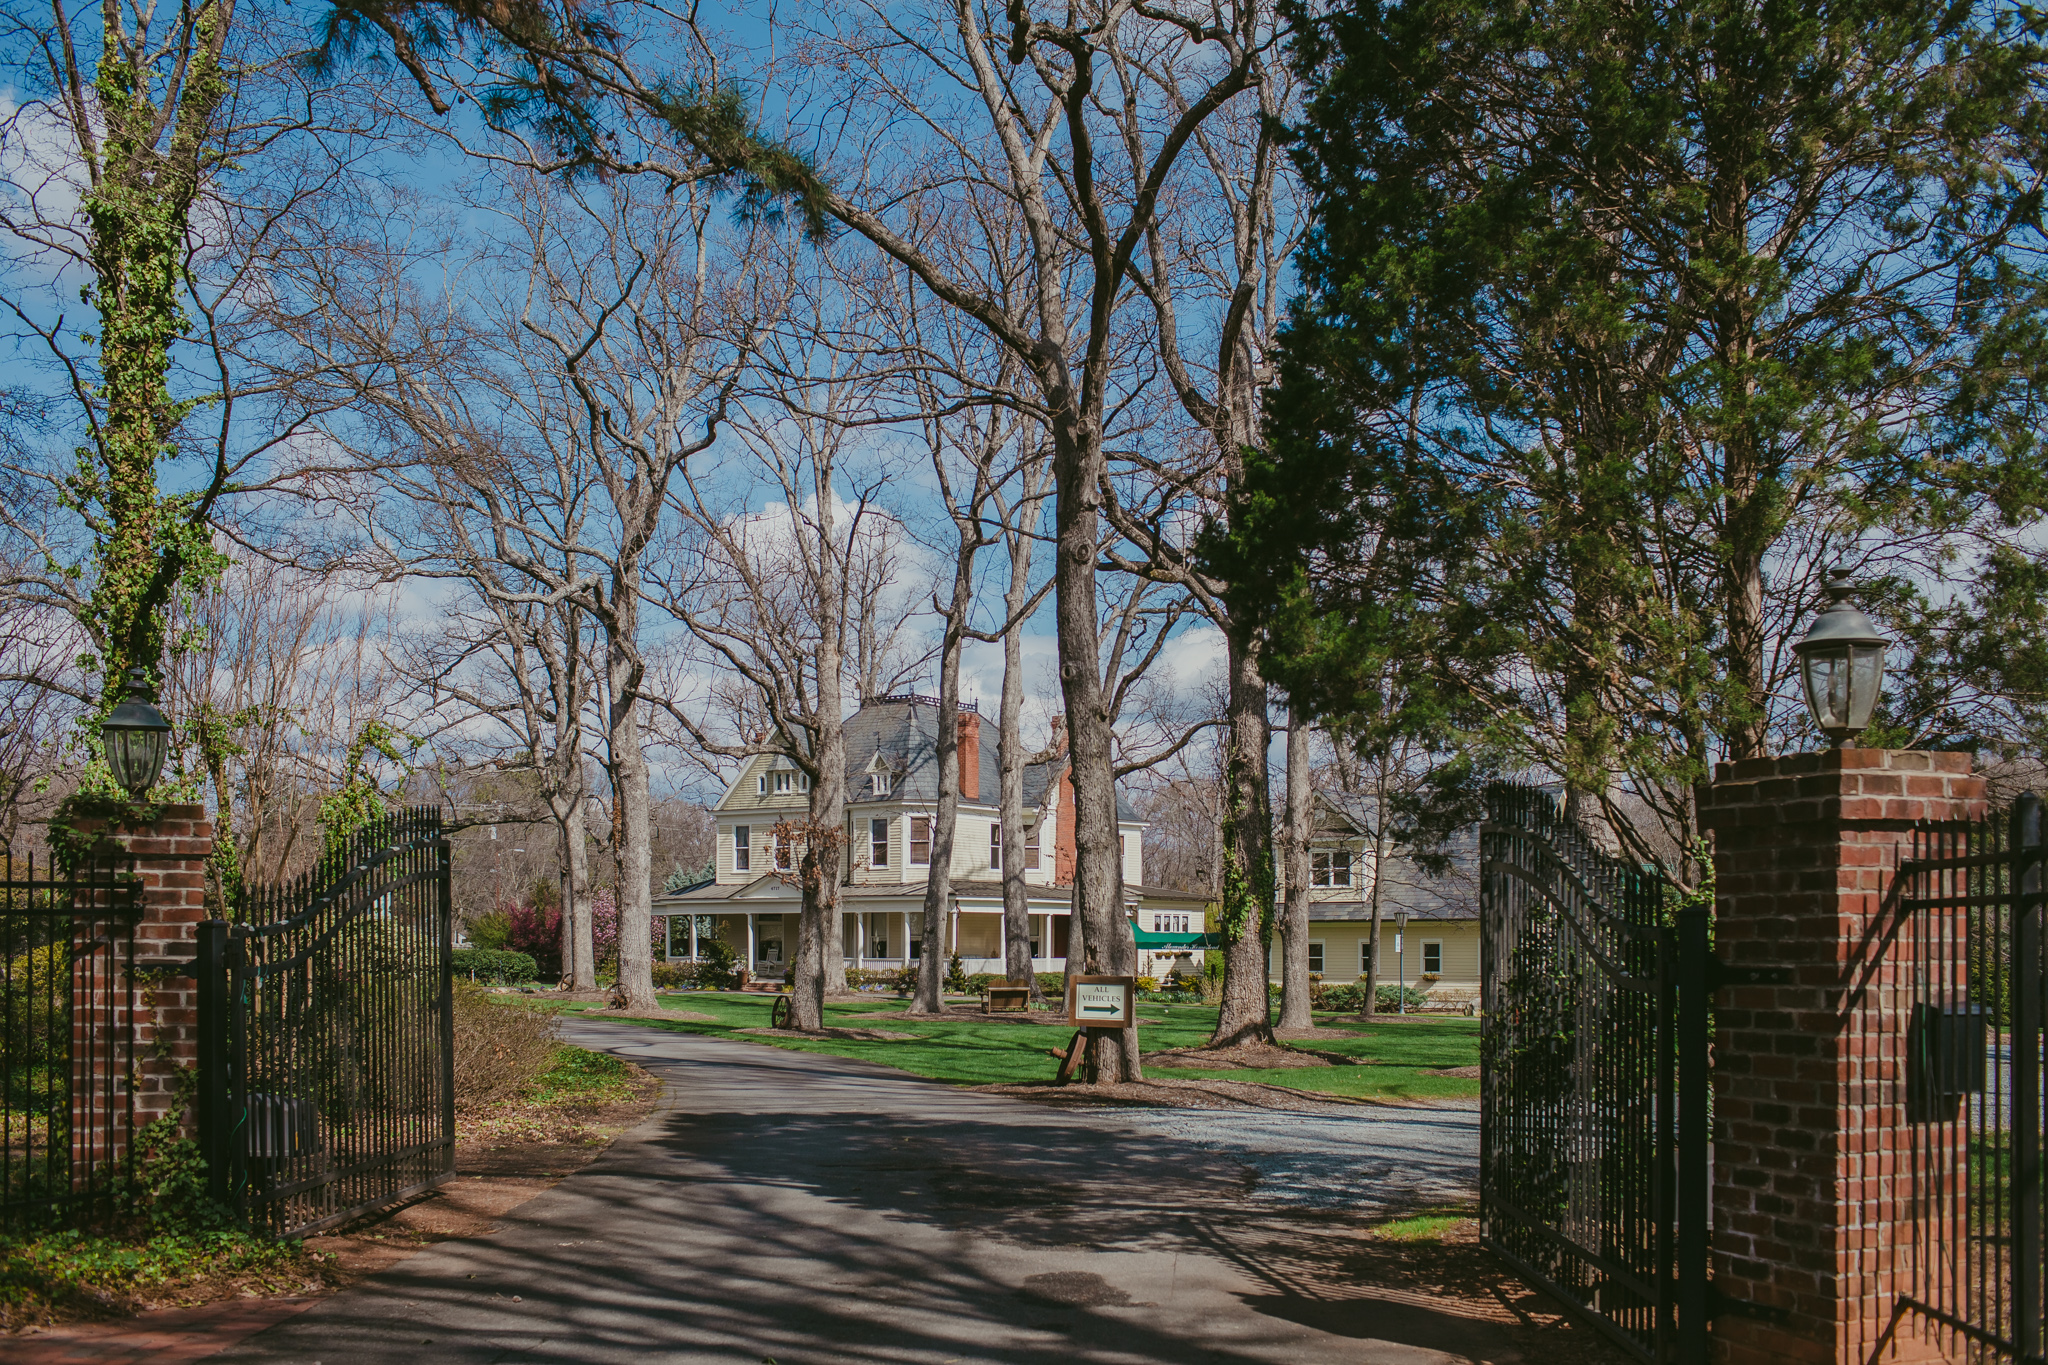 The gates that lead into Alexander Homestead